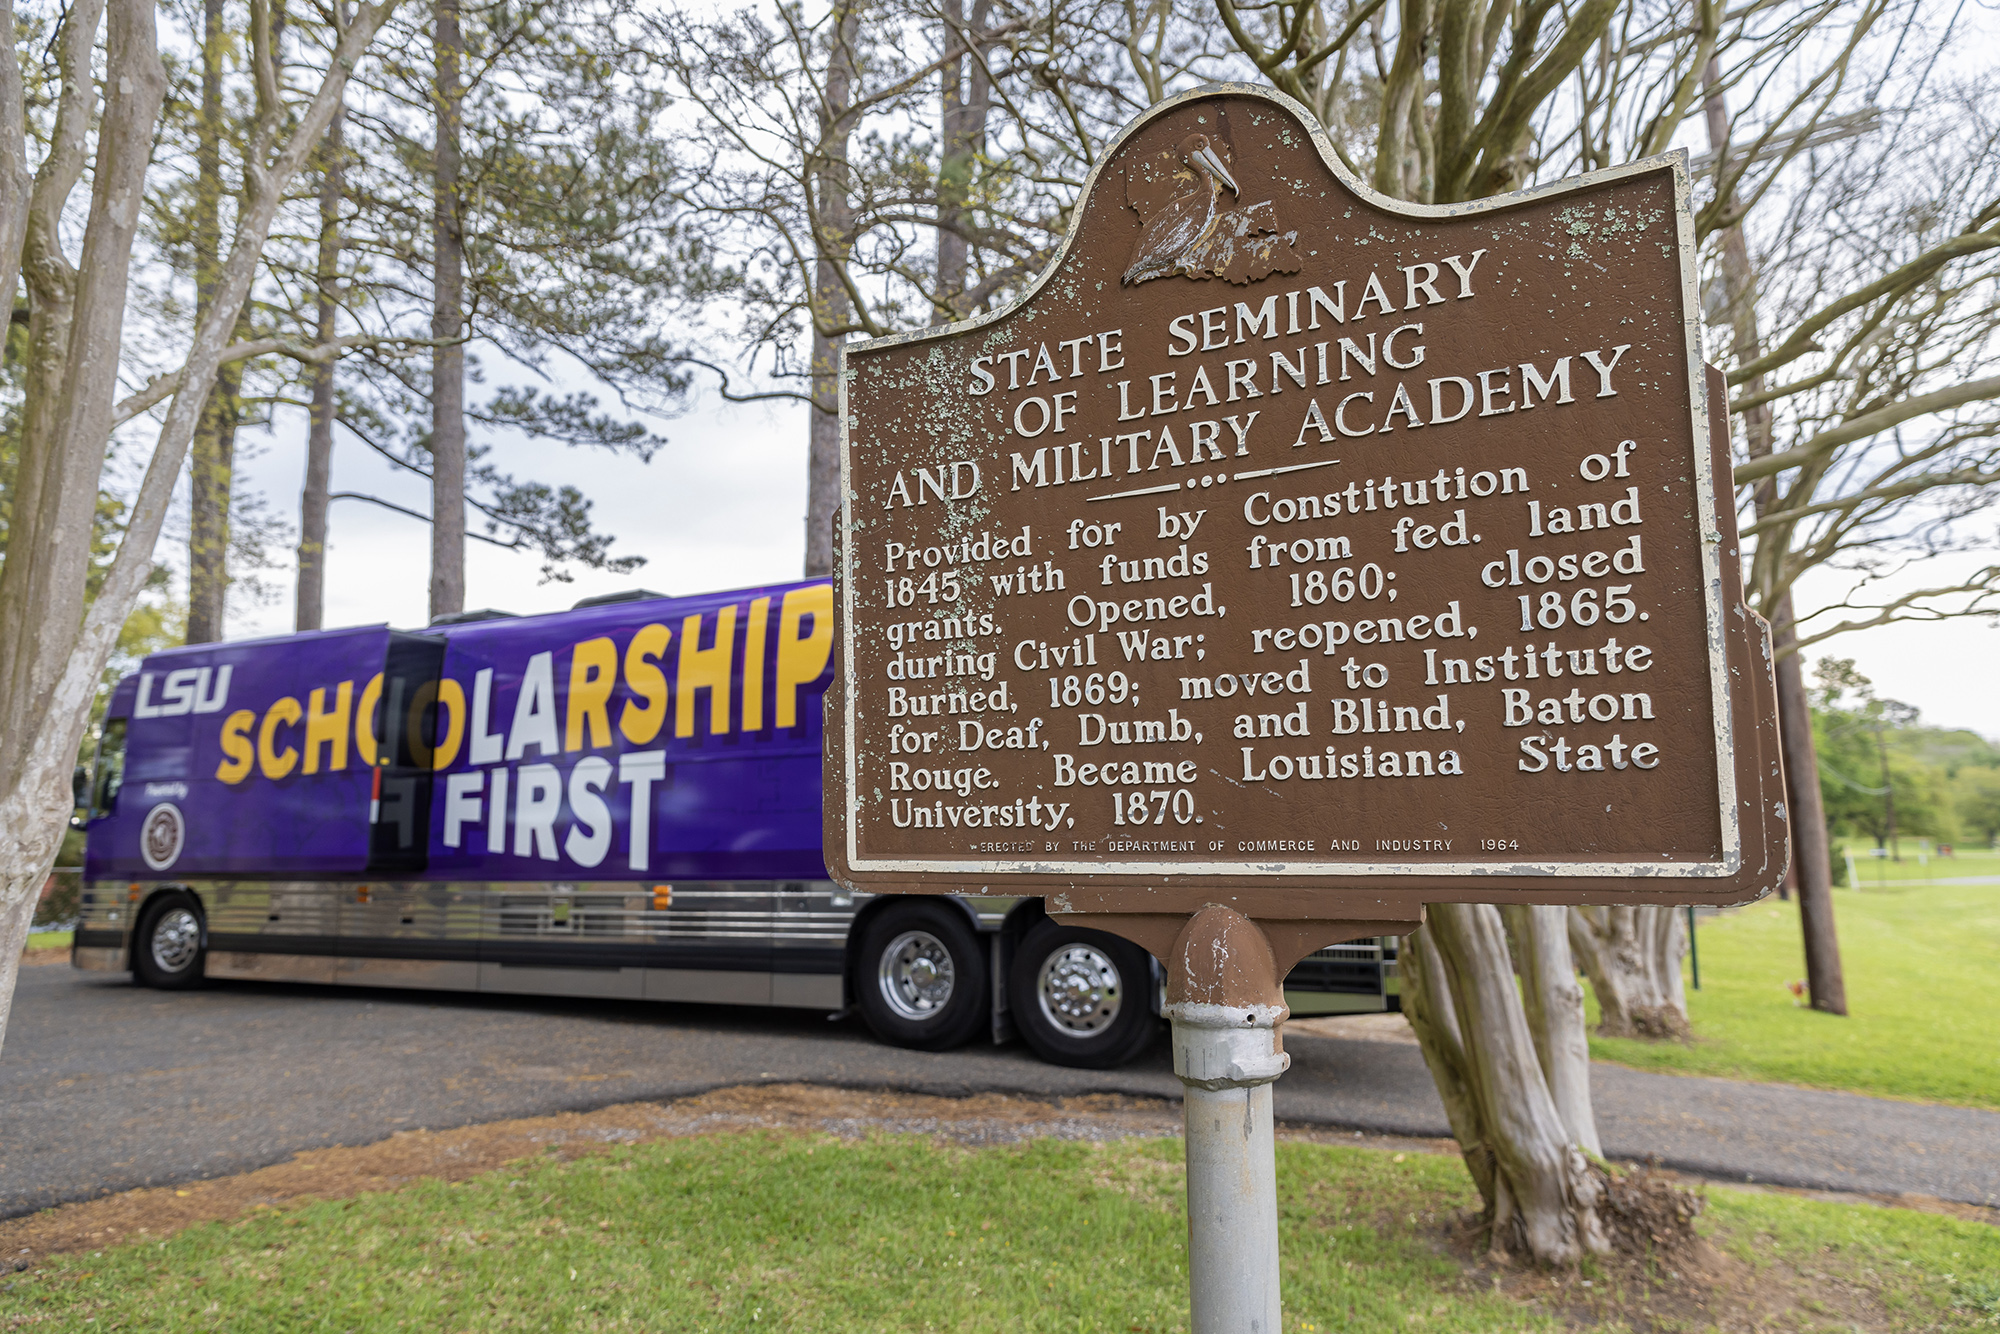  Bus parked near sign marking the original site of the LSU campus